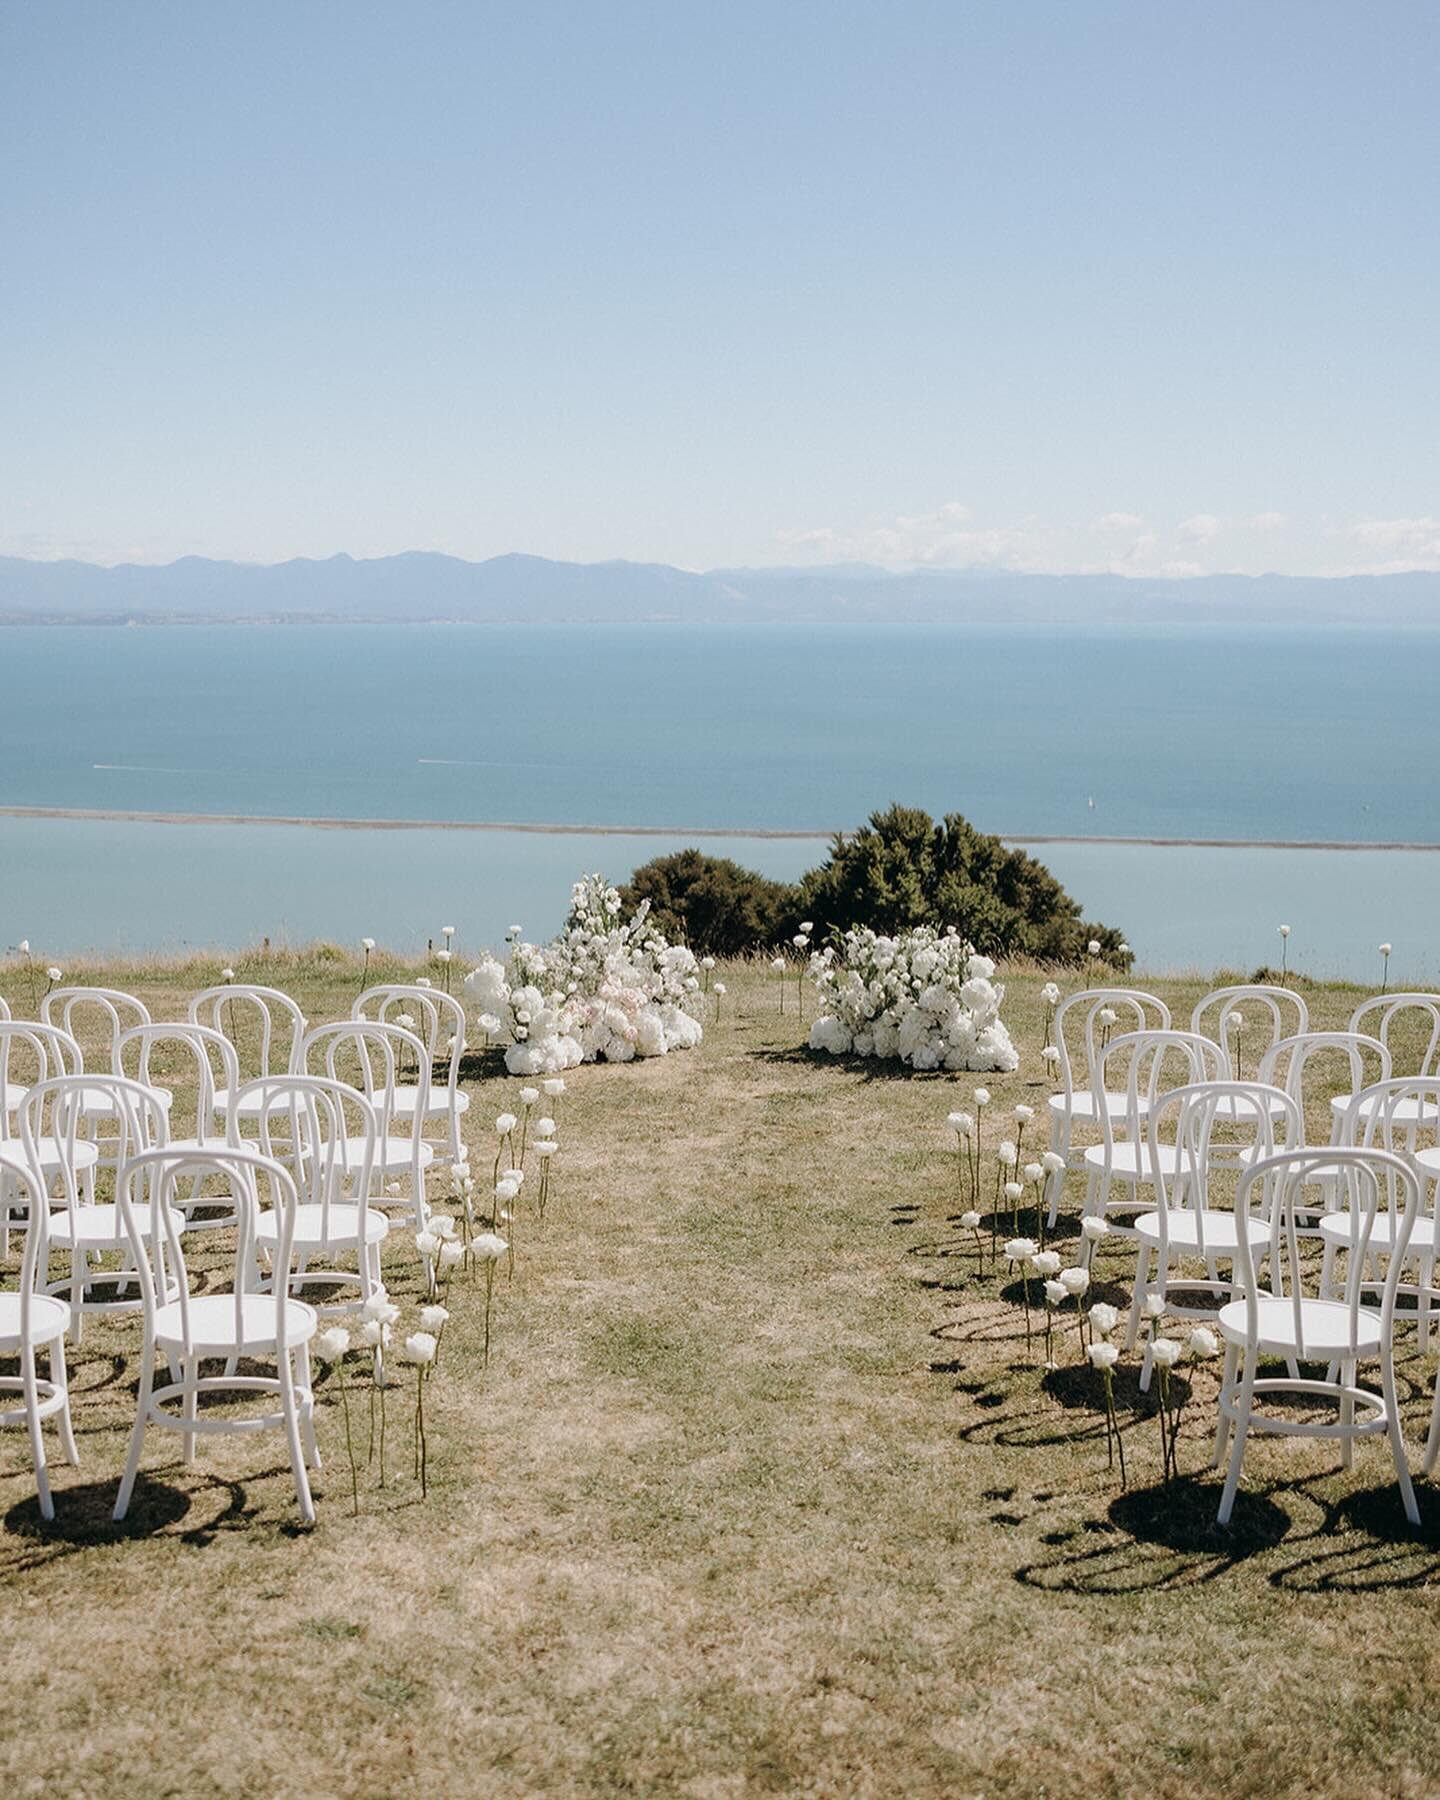 #HIRE | With the stunning, Nelson-based wedding of Lydia and Hamish, our classic, elegant Bentwood chairs once again formed part of a beautiful day to remember. 

From the serene lakes and rivers of the south, to the radiant sounds of the north, Hayl